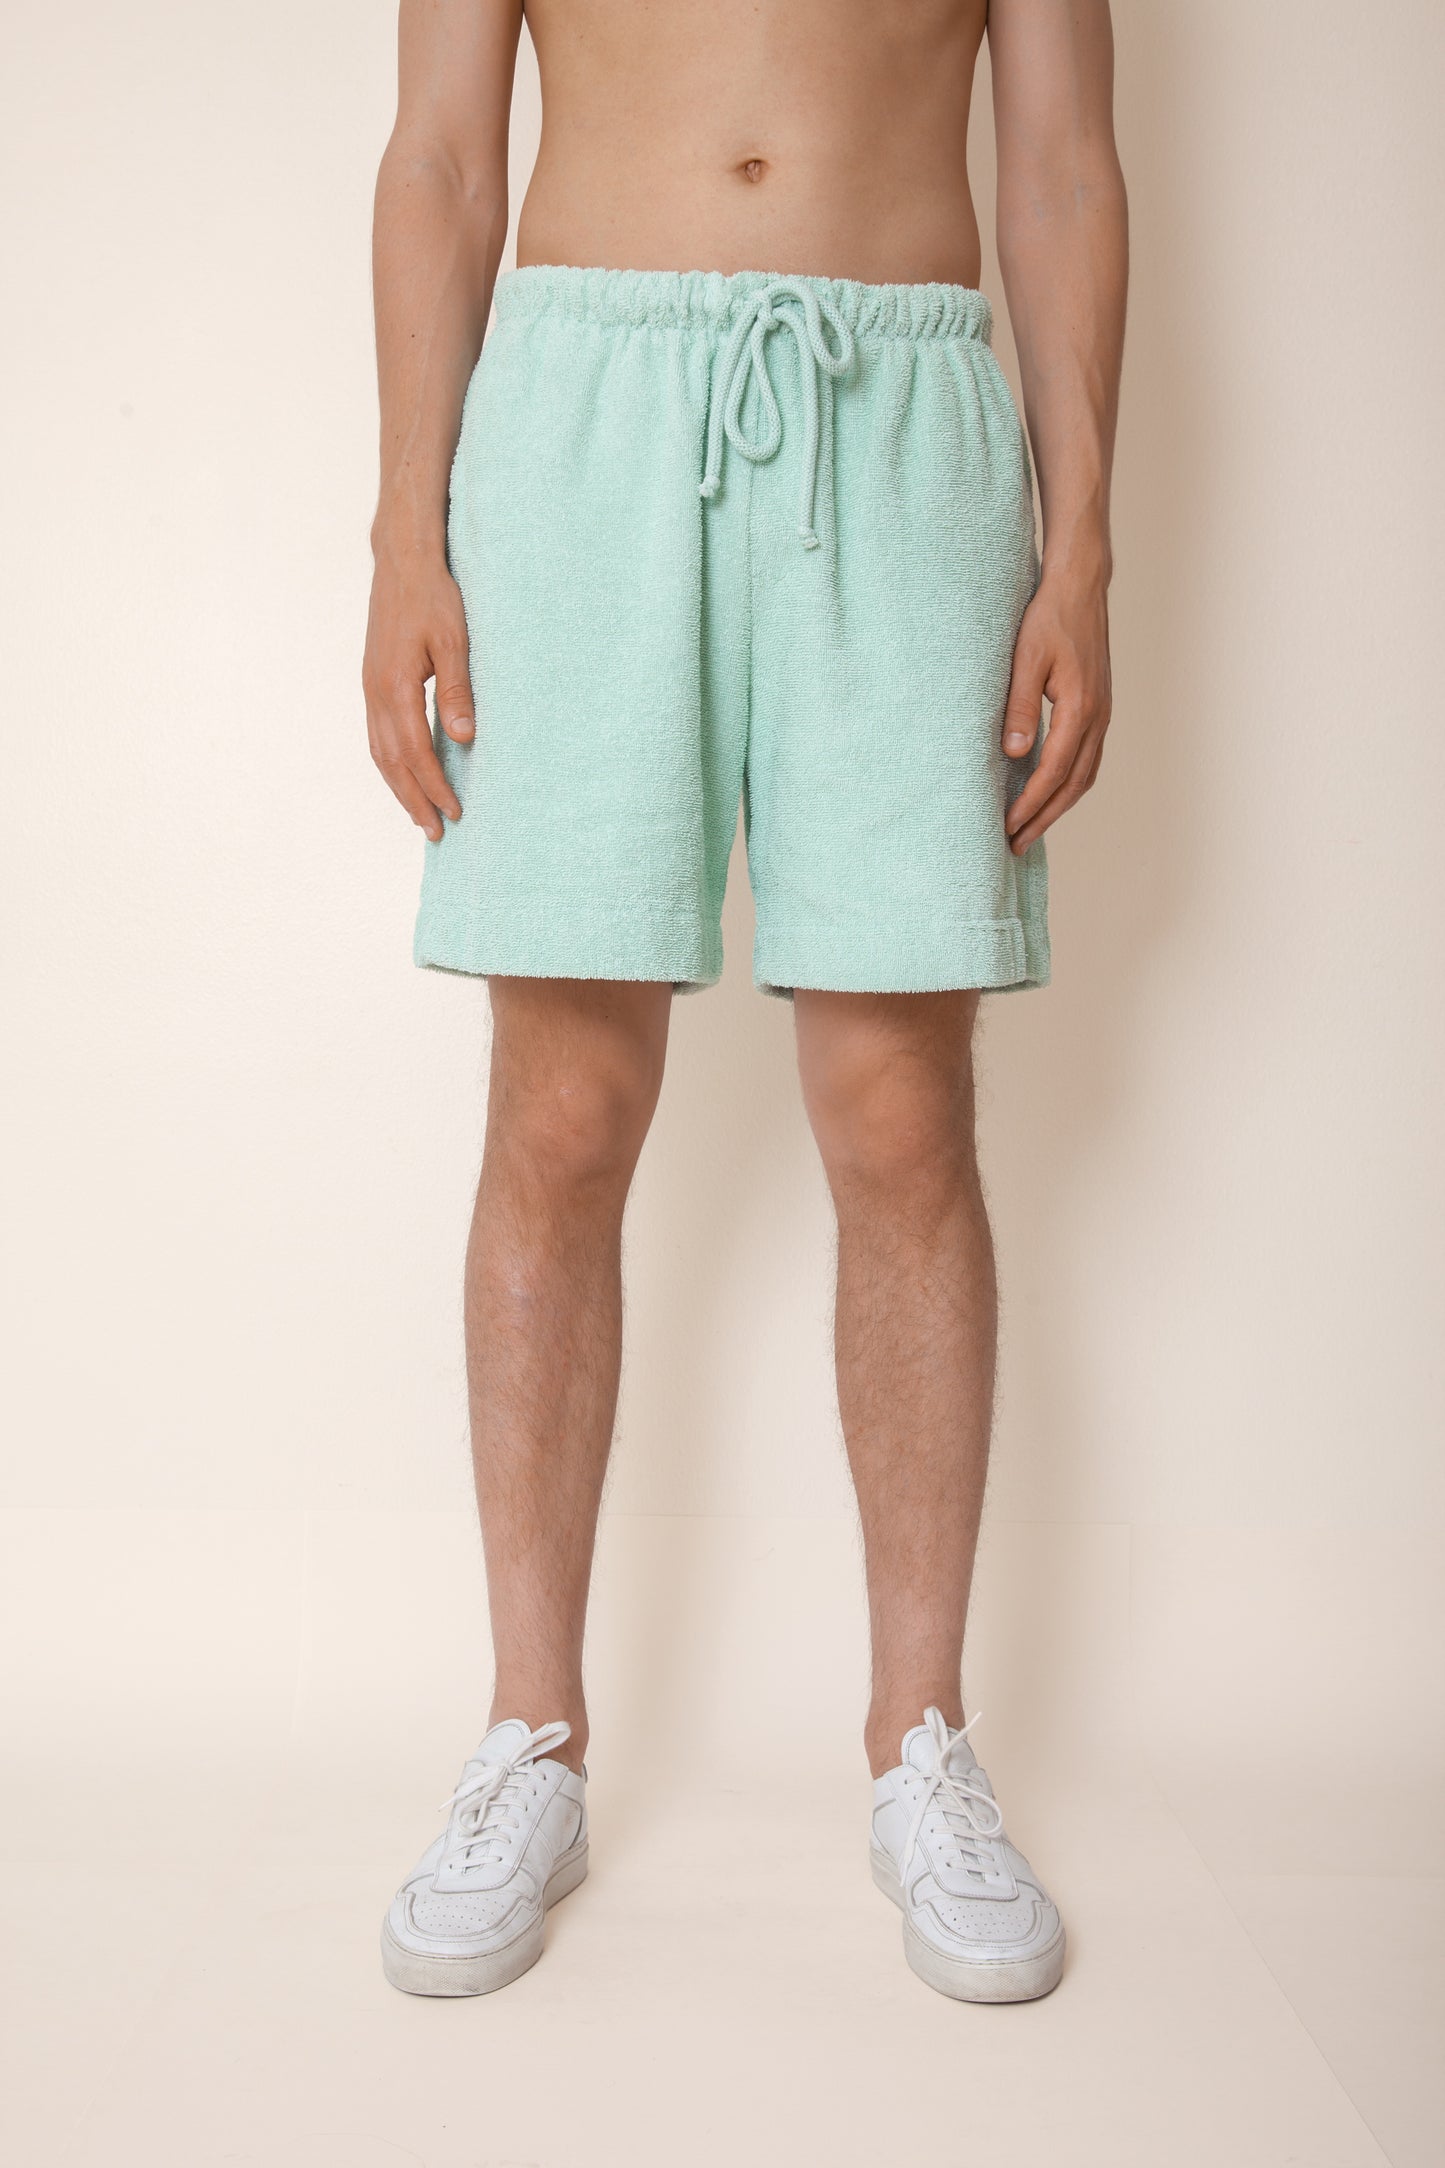 Unisex Terry Basketball Shorts in Mint